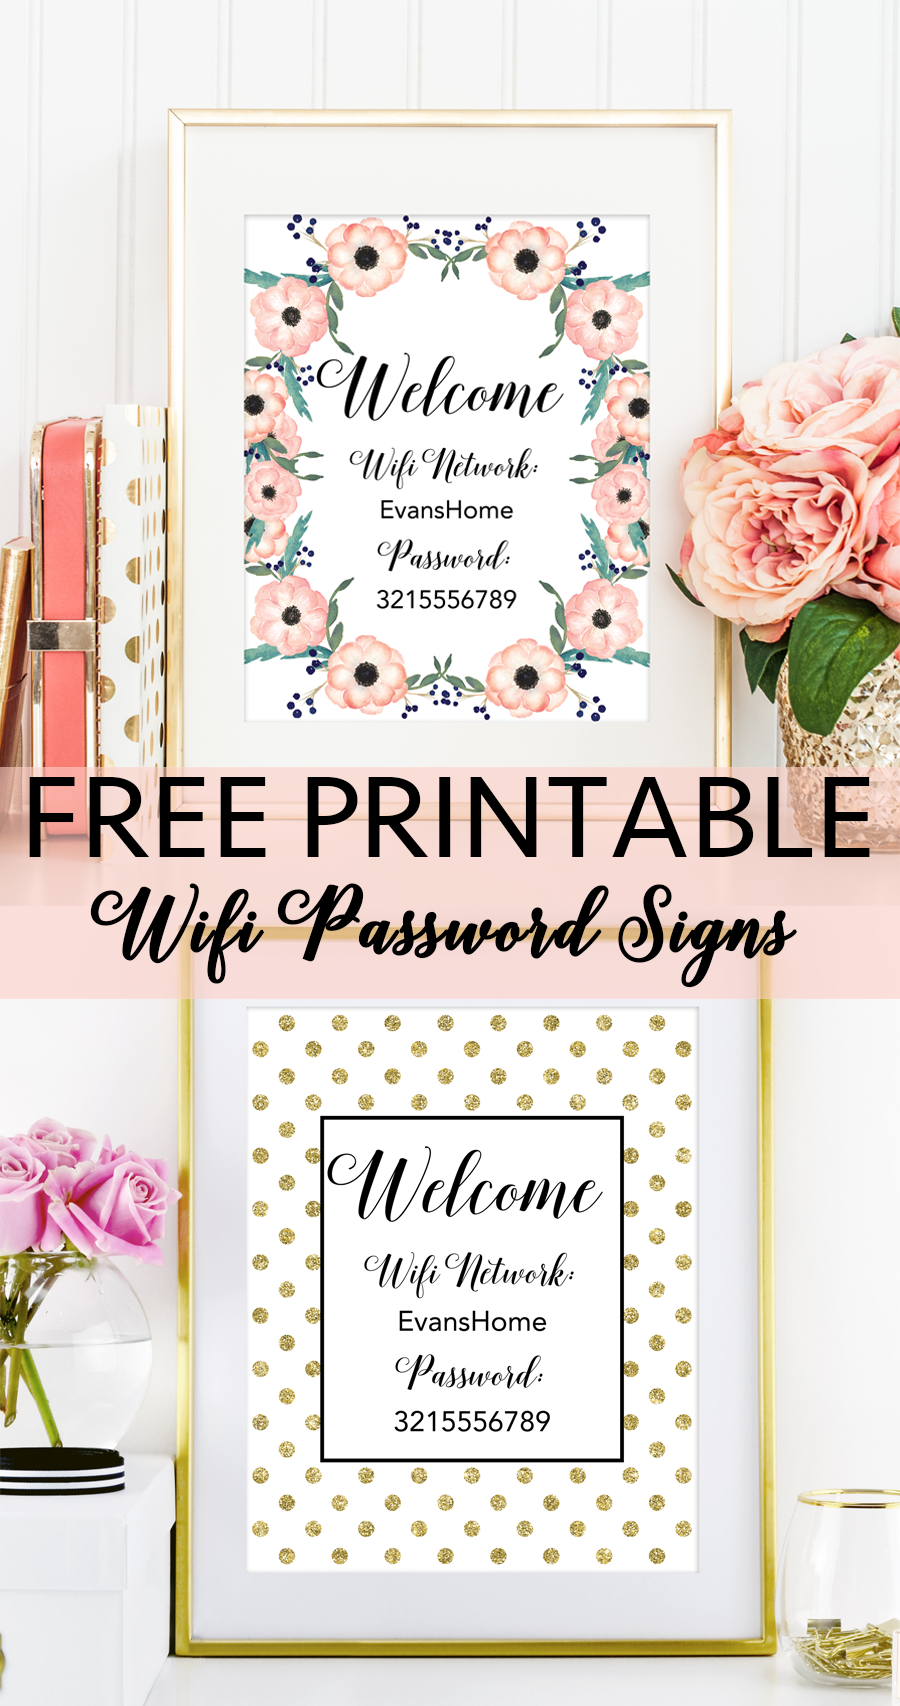 Free Printable Wifi Password Signs | Decorating Ideas - Home Decor - Free Printable Wifi Password Signs